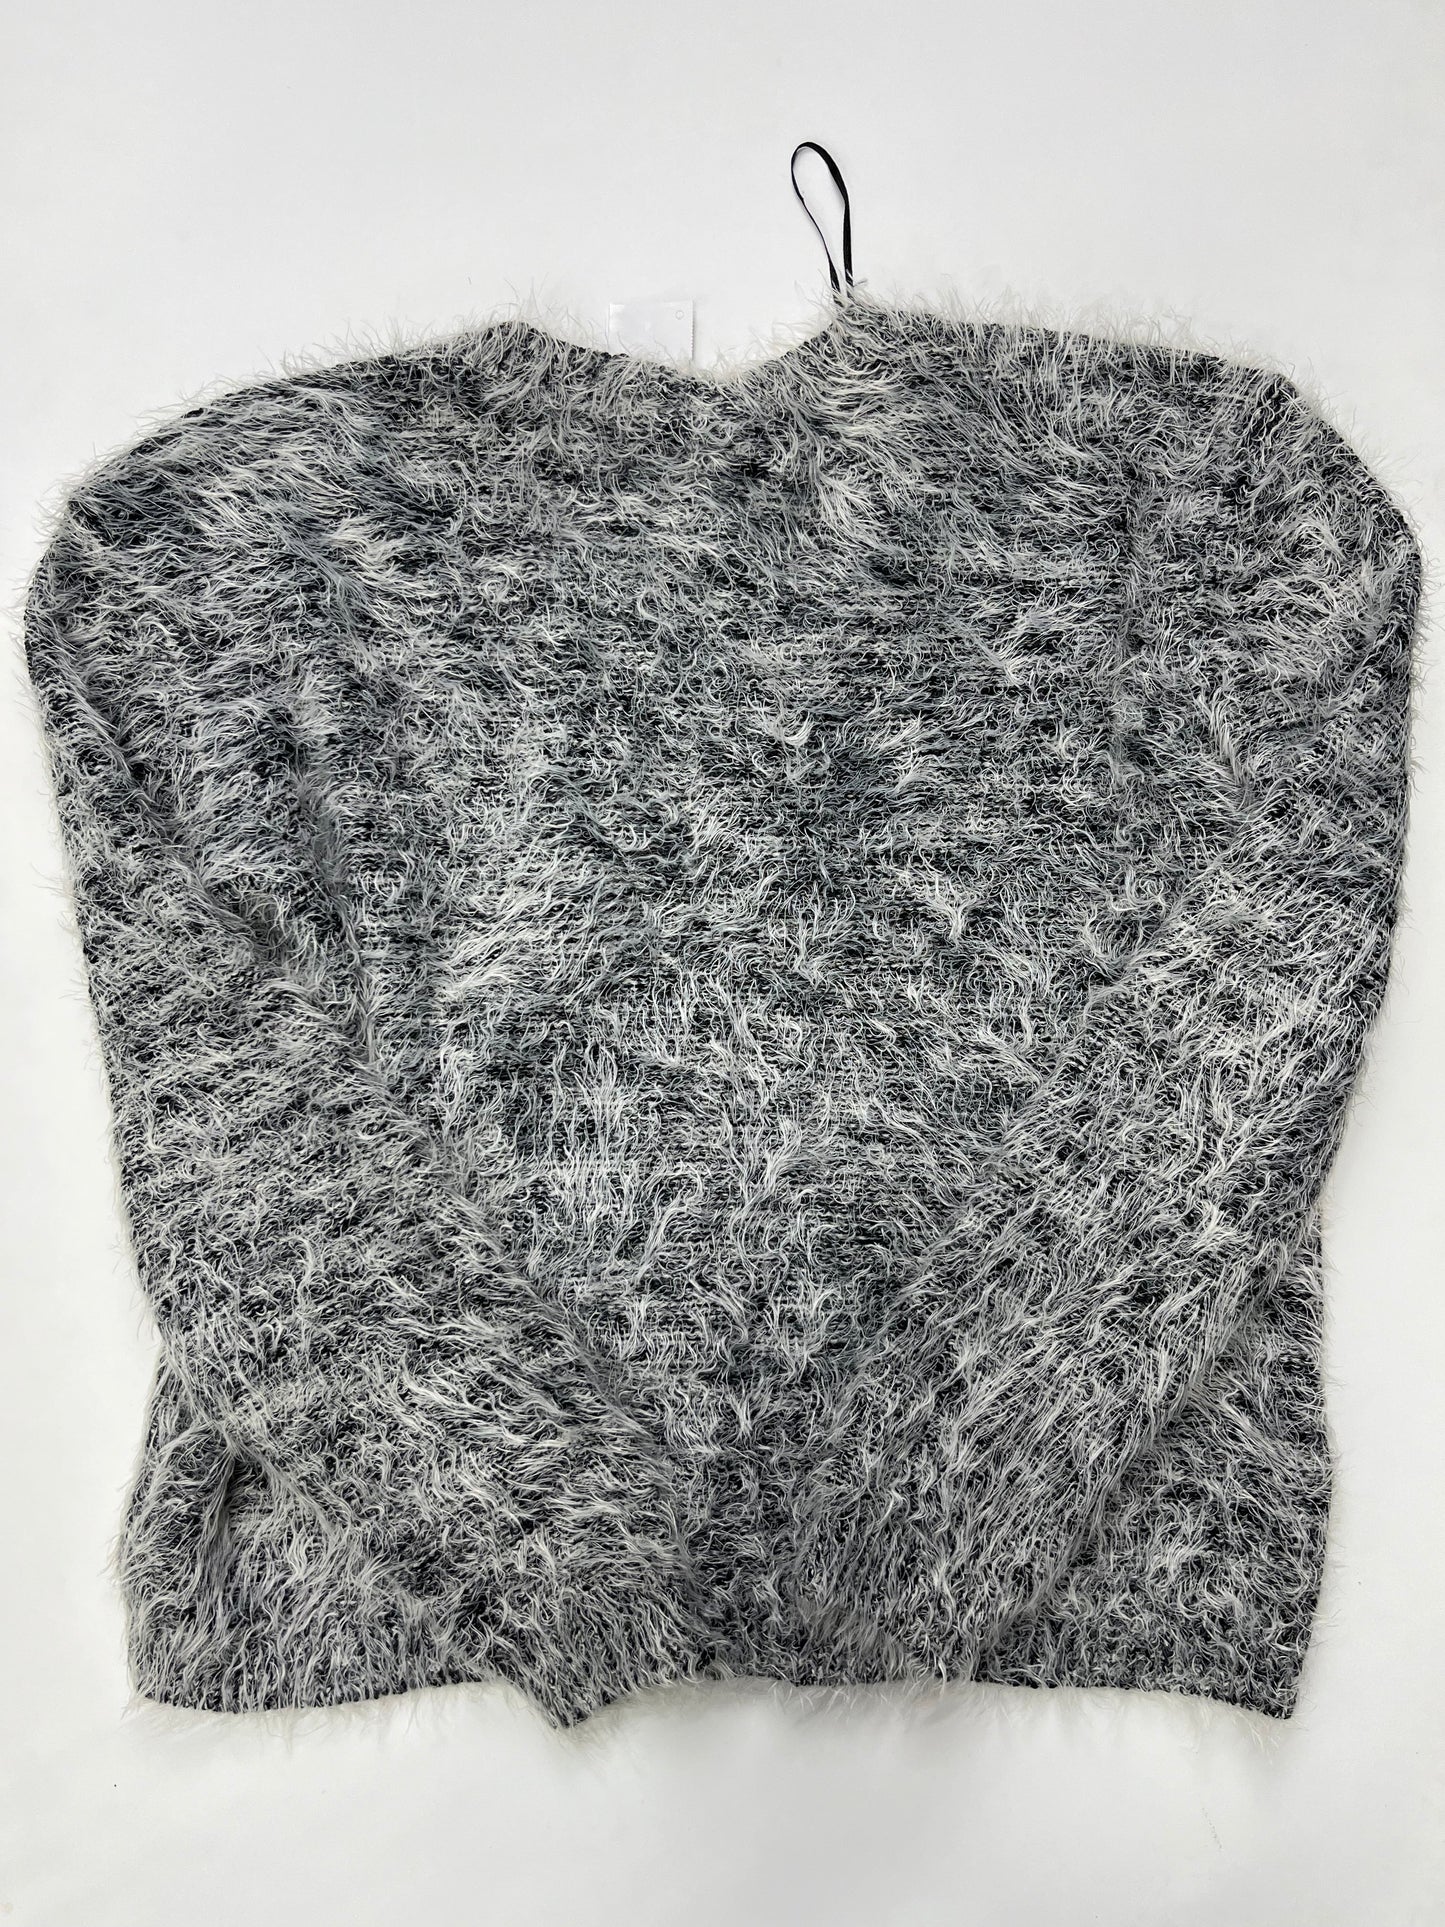 Sweater By Divided  Size: M